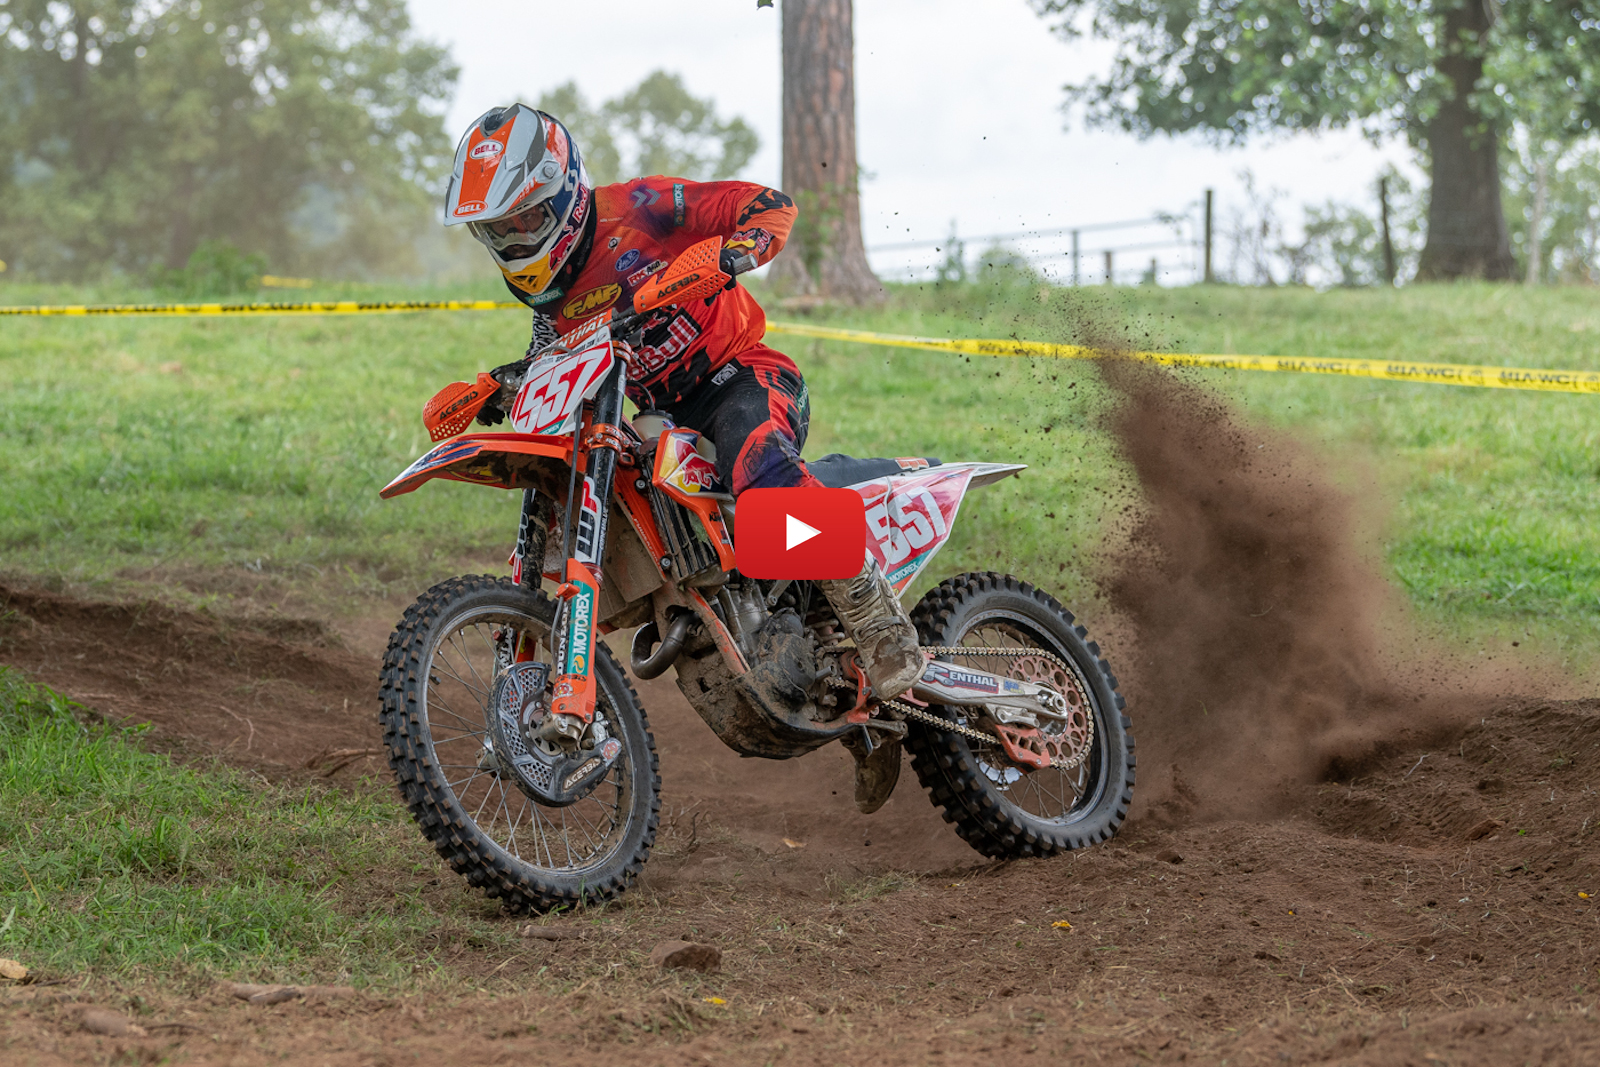 Events Highlights: Rockcrusher Full Gas Sprint Enduro – Kailub Russell takes the title 